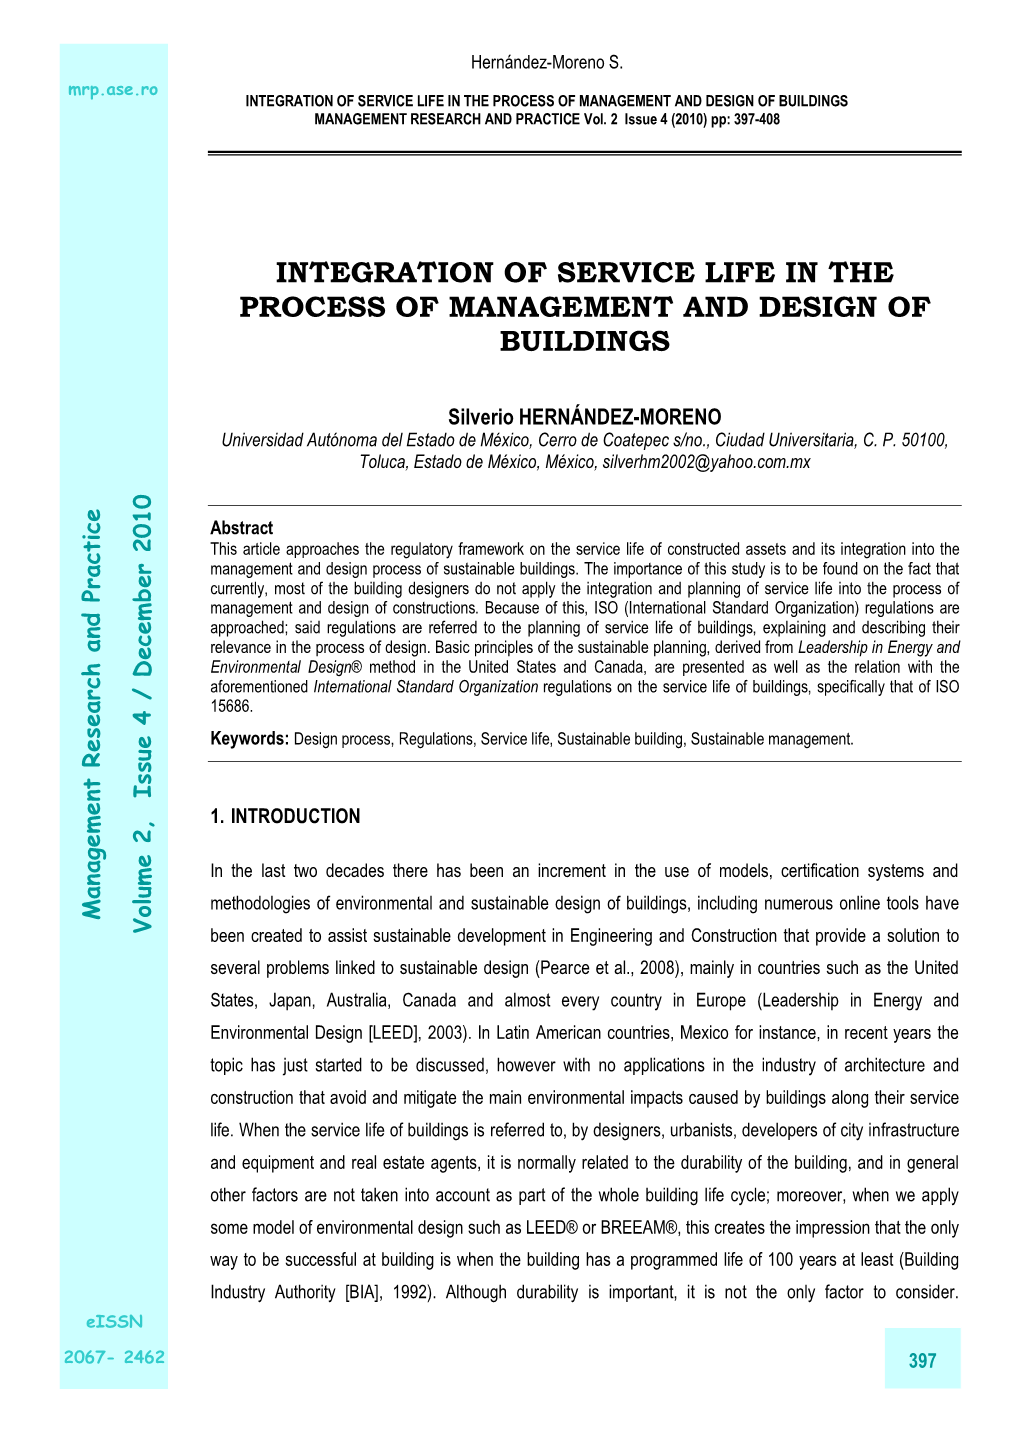 INTEGRATION of SERVICE LIFE in the PROCESS of MANAGEMENT and DESIGN of BUILDINGS MANAGEMENT RESEARCH and PRACTICE Vol